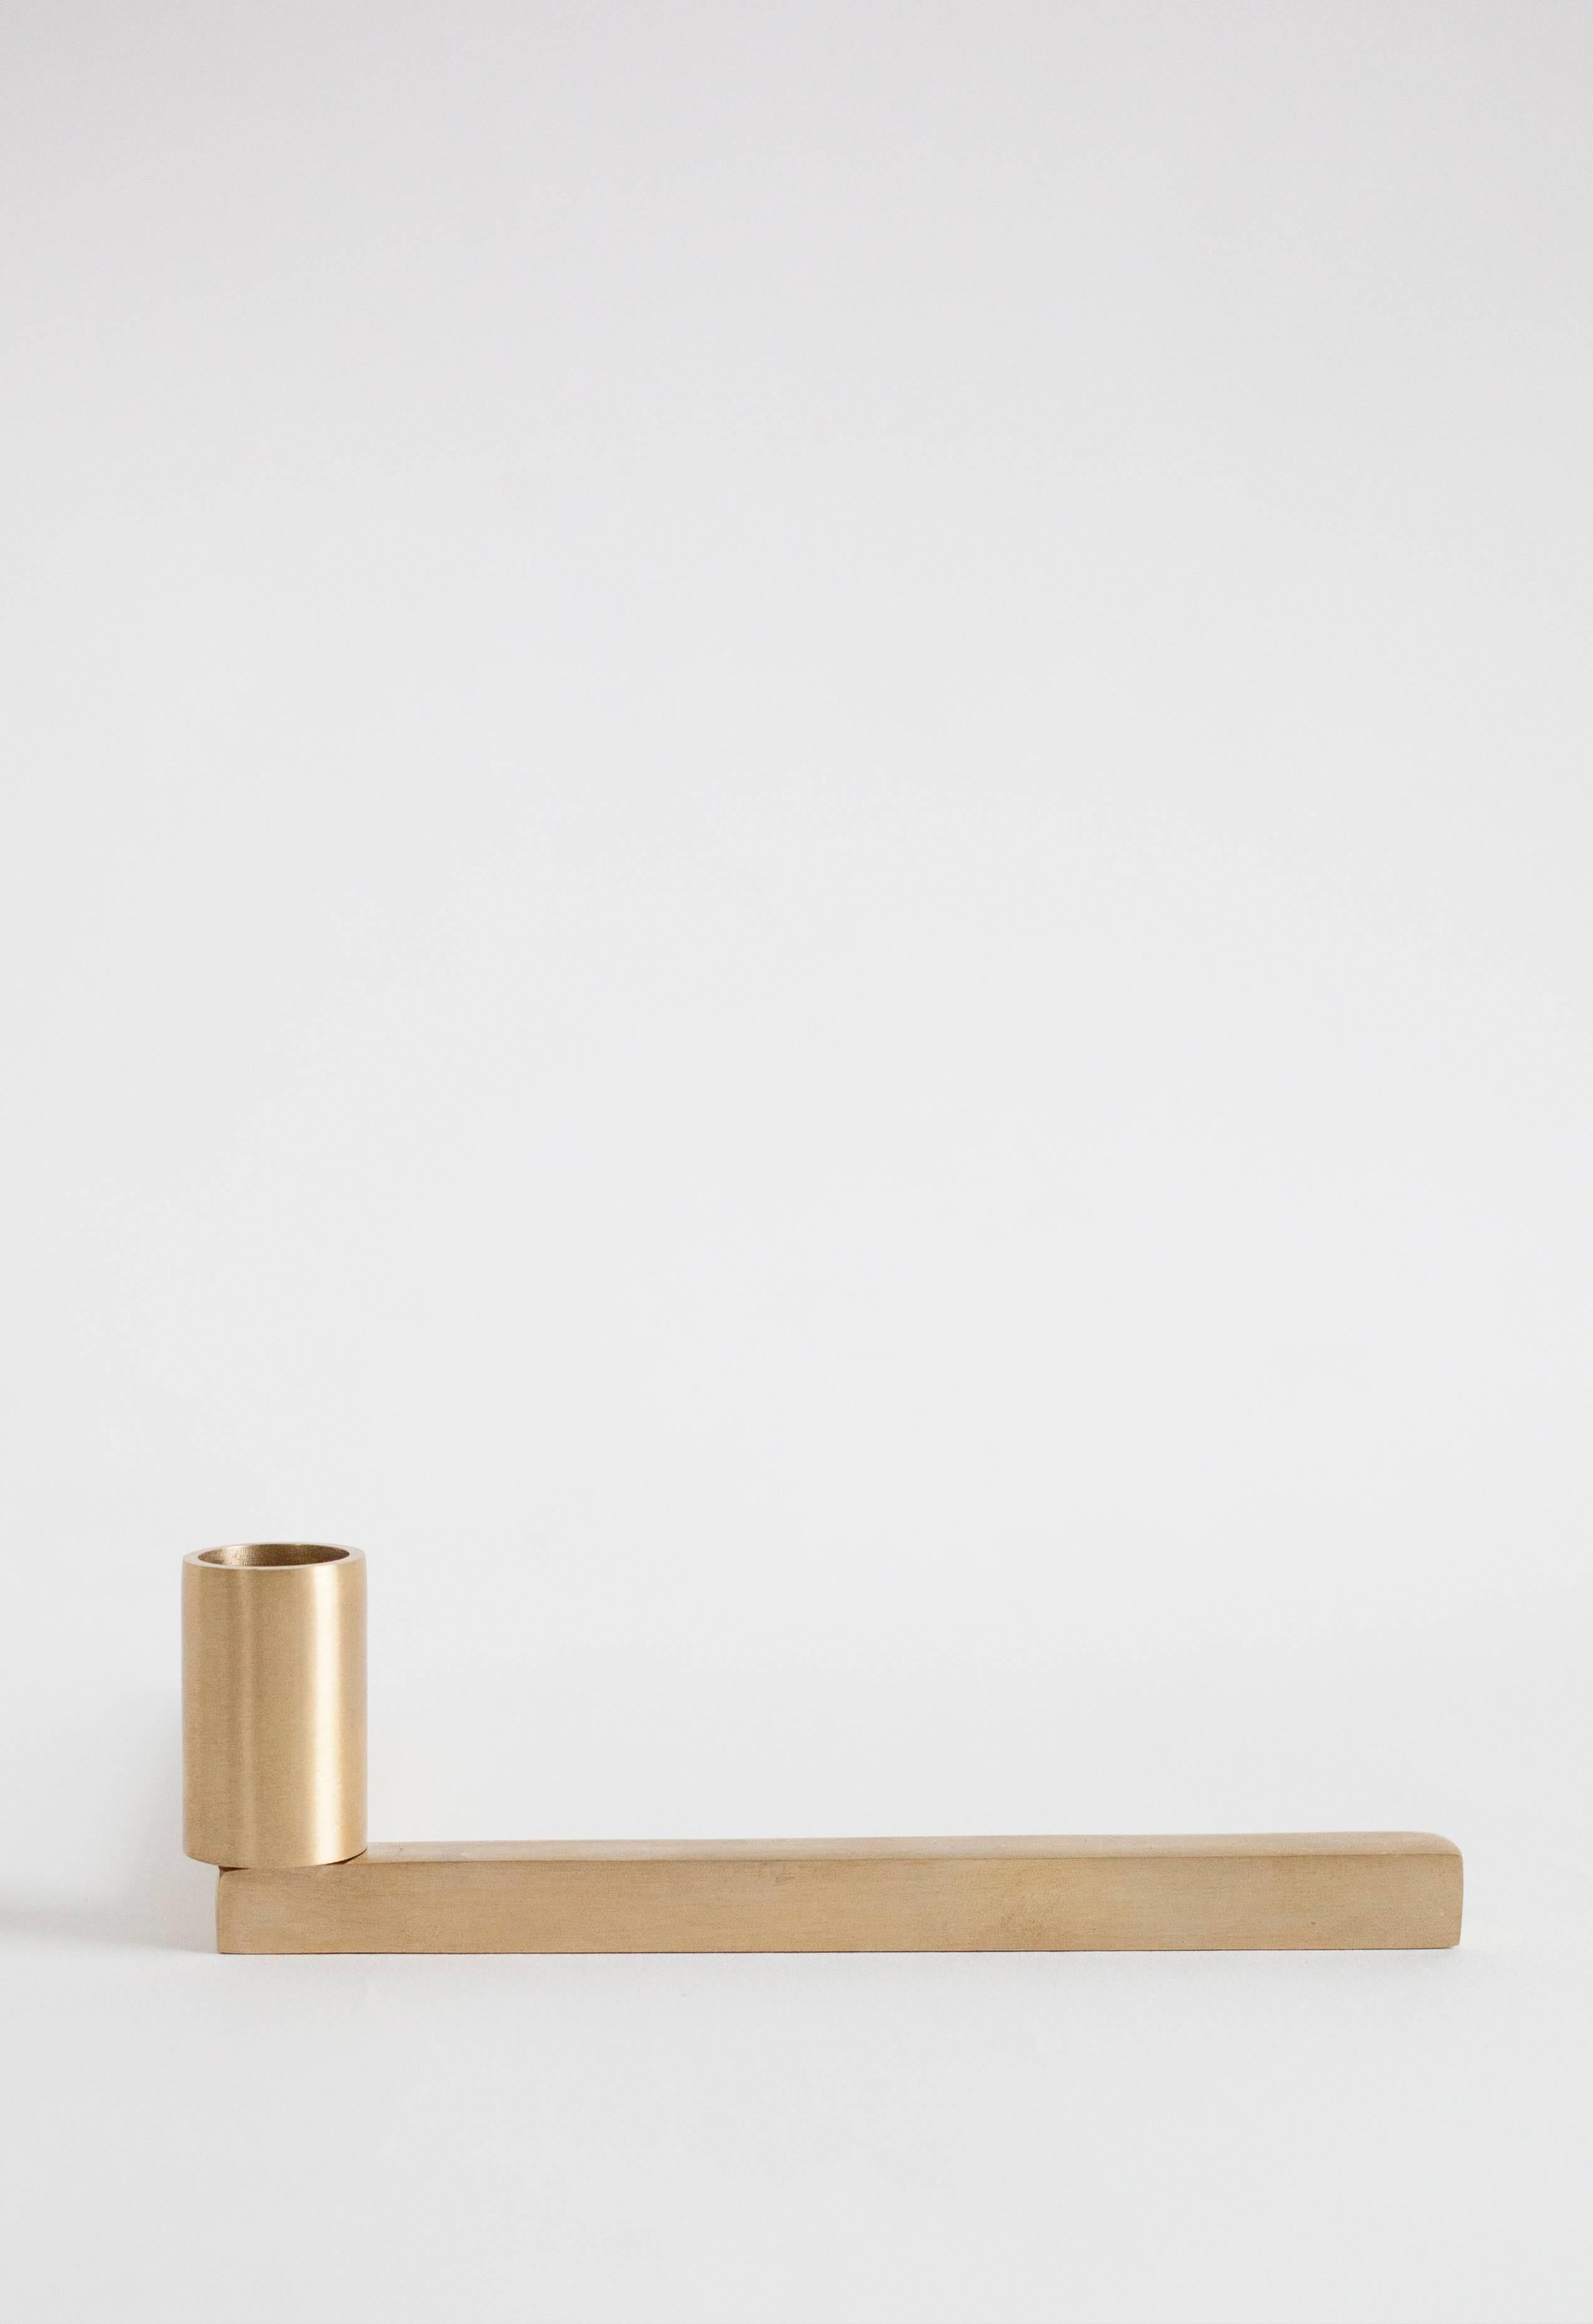 Orphan Work 001 Candle Holder
Shown in brushed brass
Available in brushed brass or blackened brass
Measures 6.5